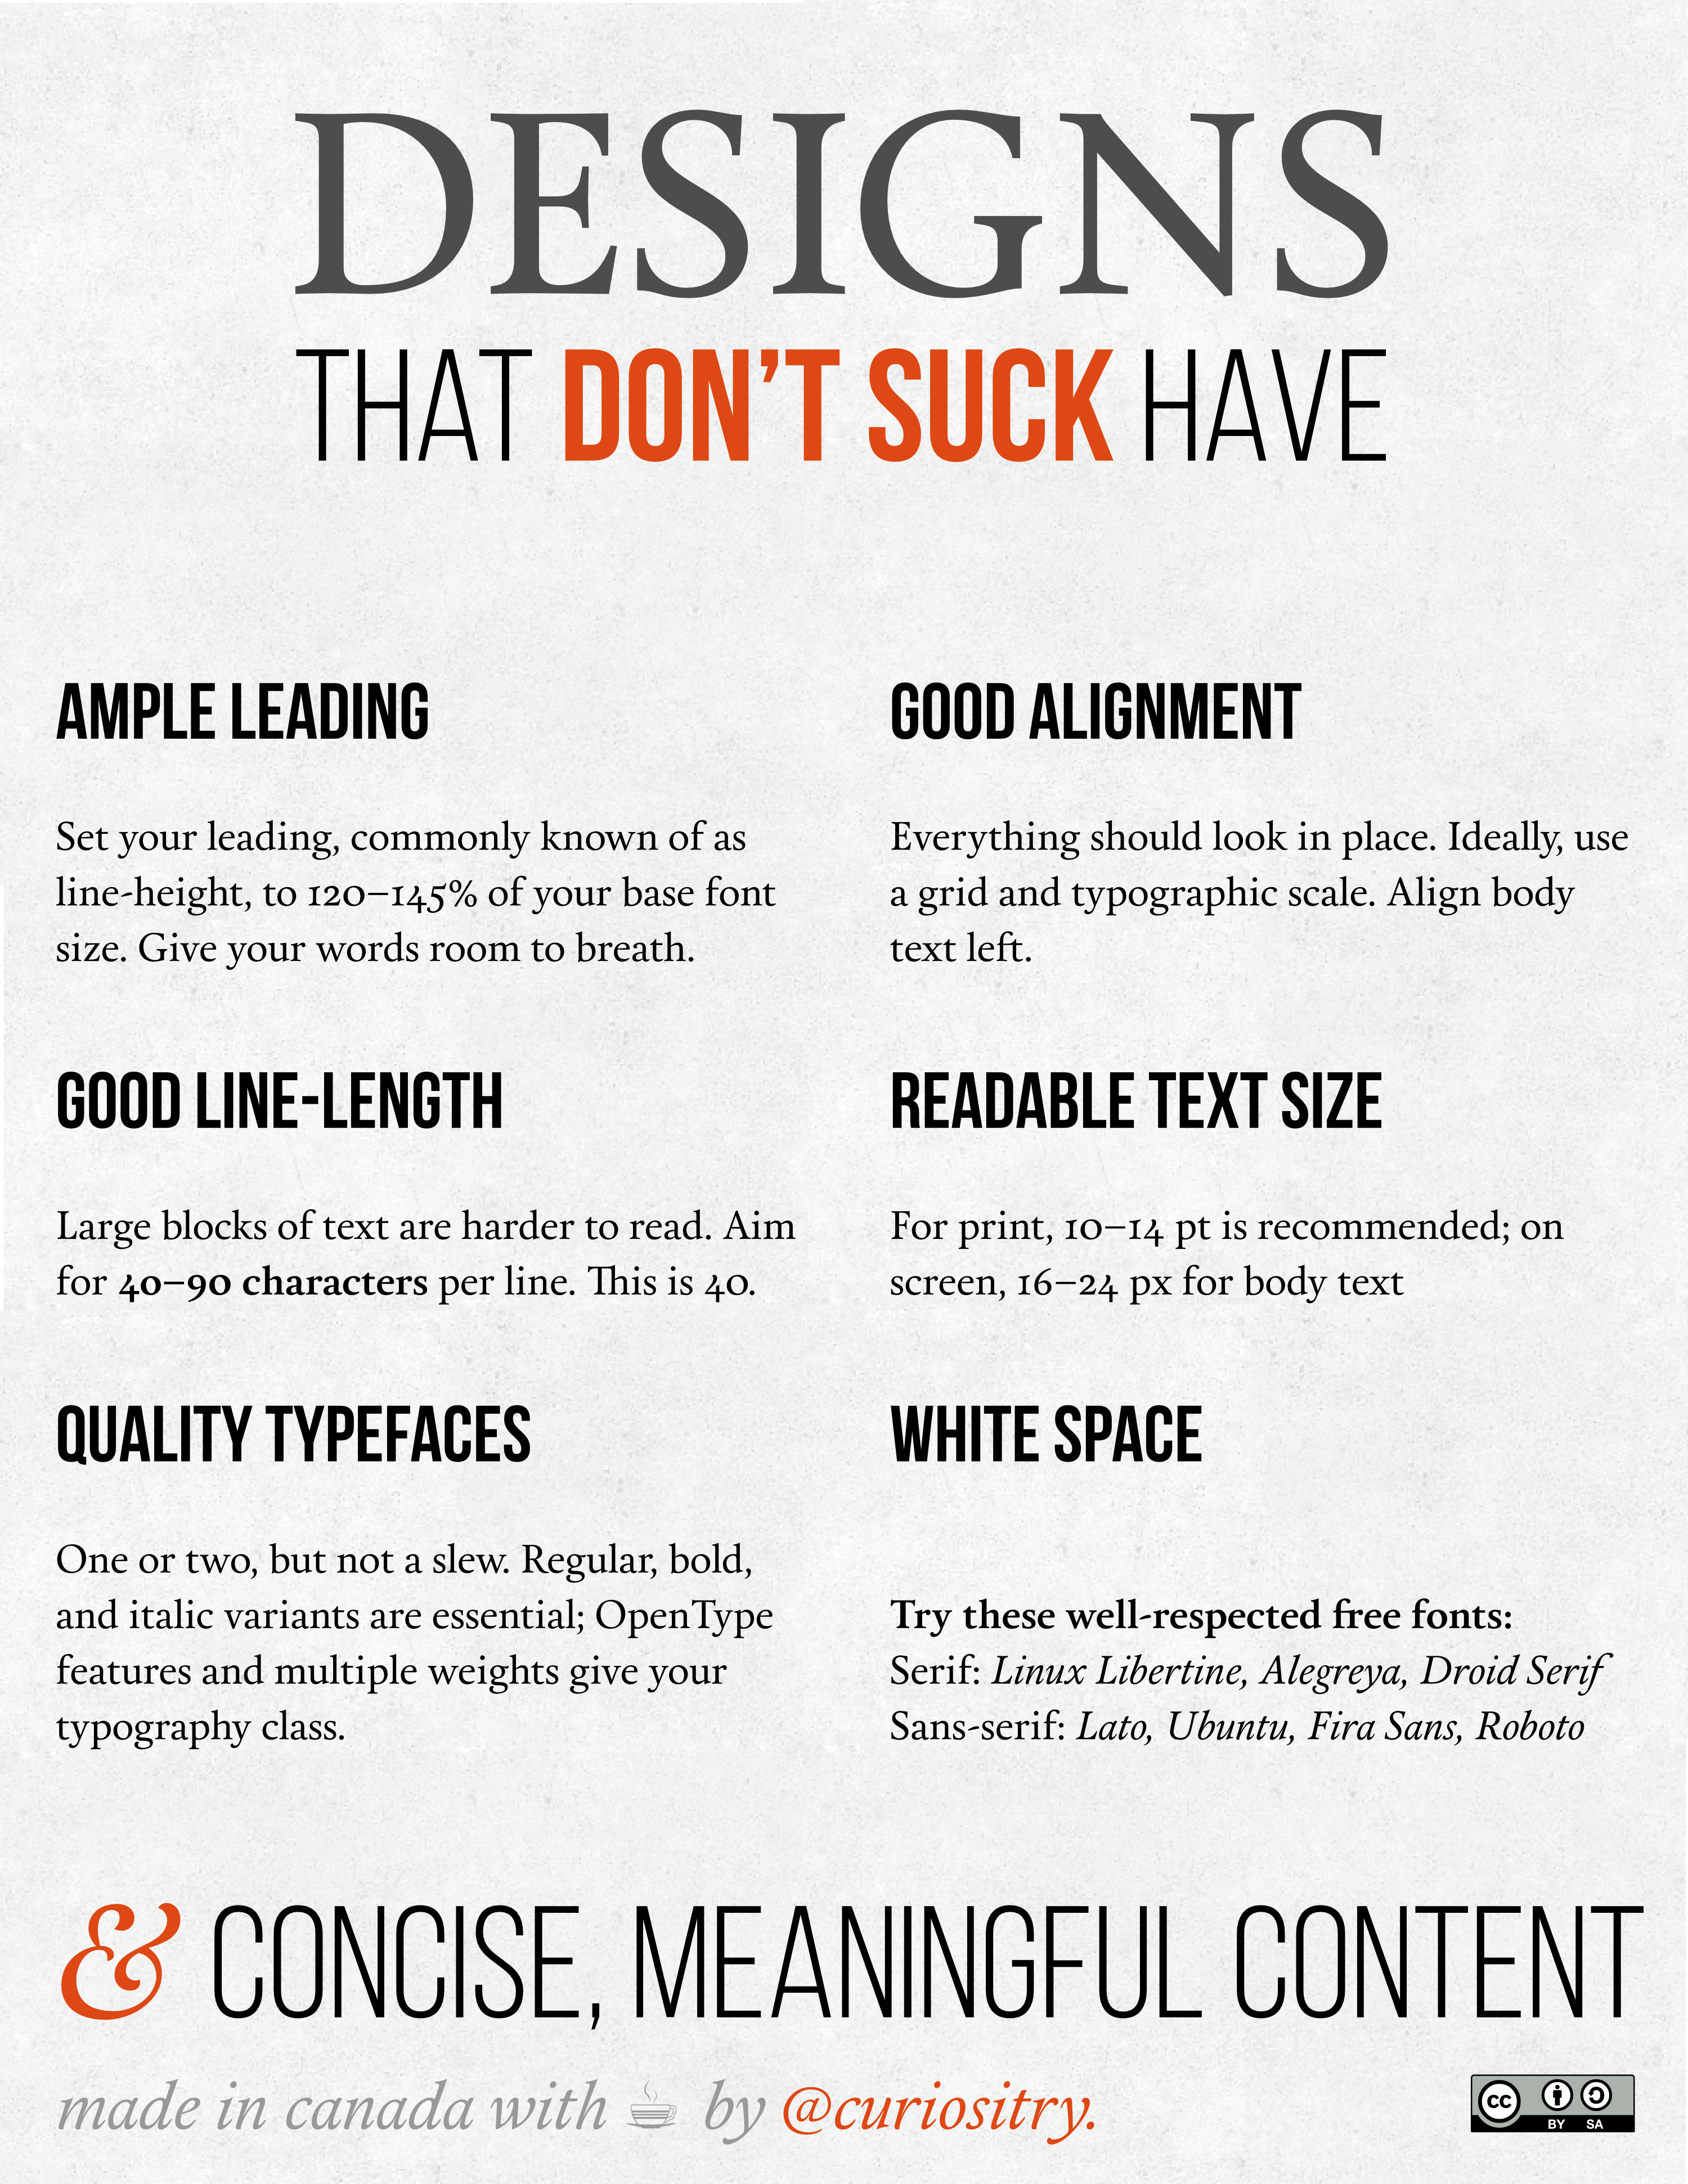 Designs that Don’t Suck Infographic